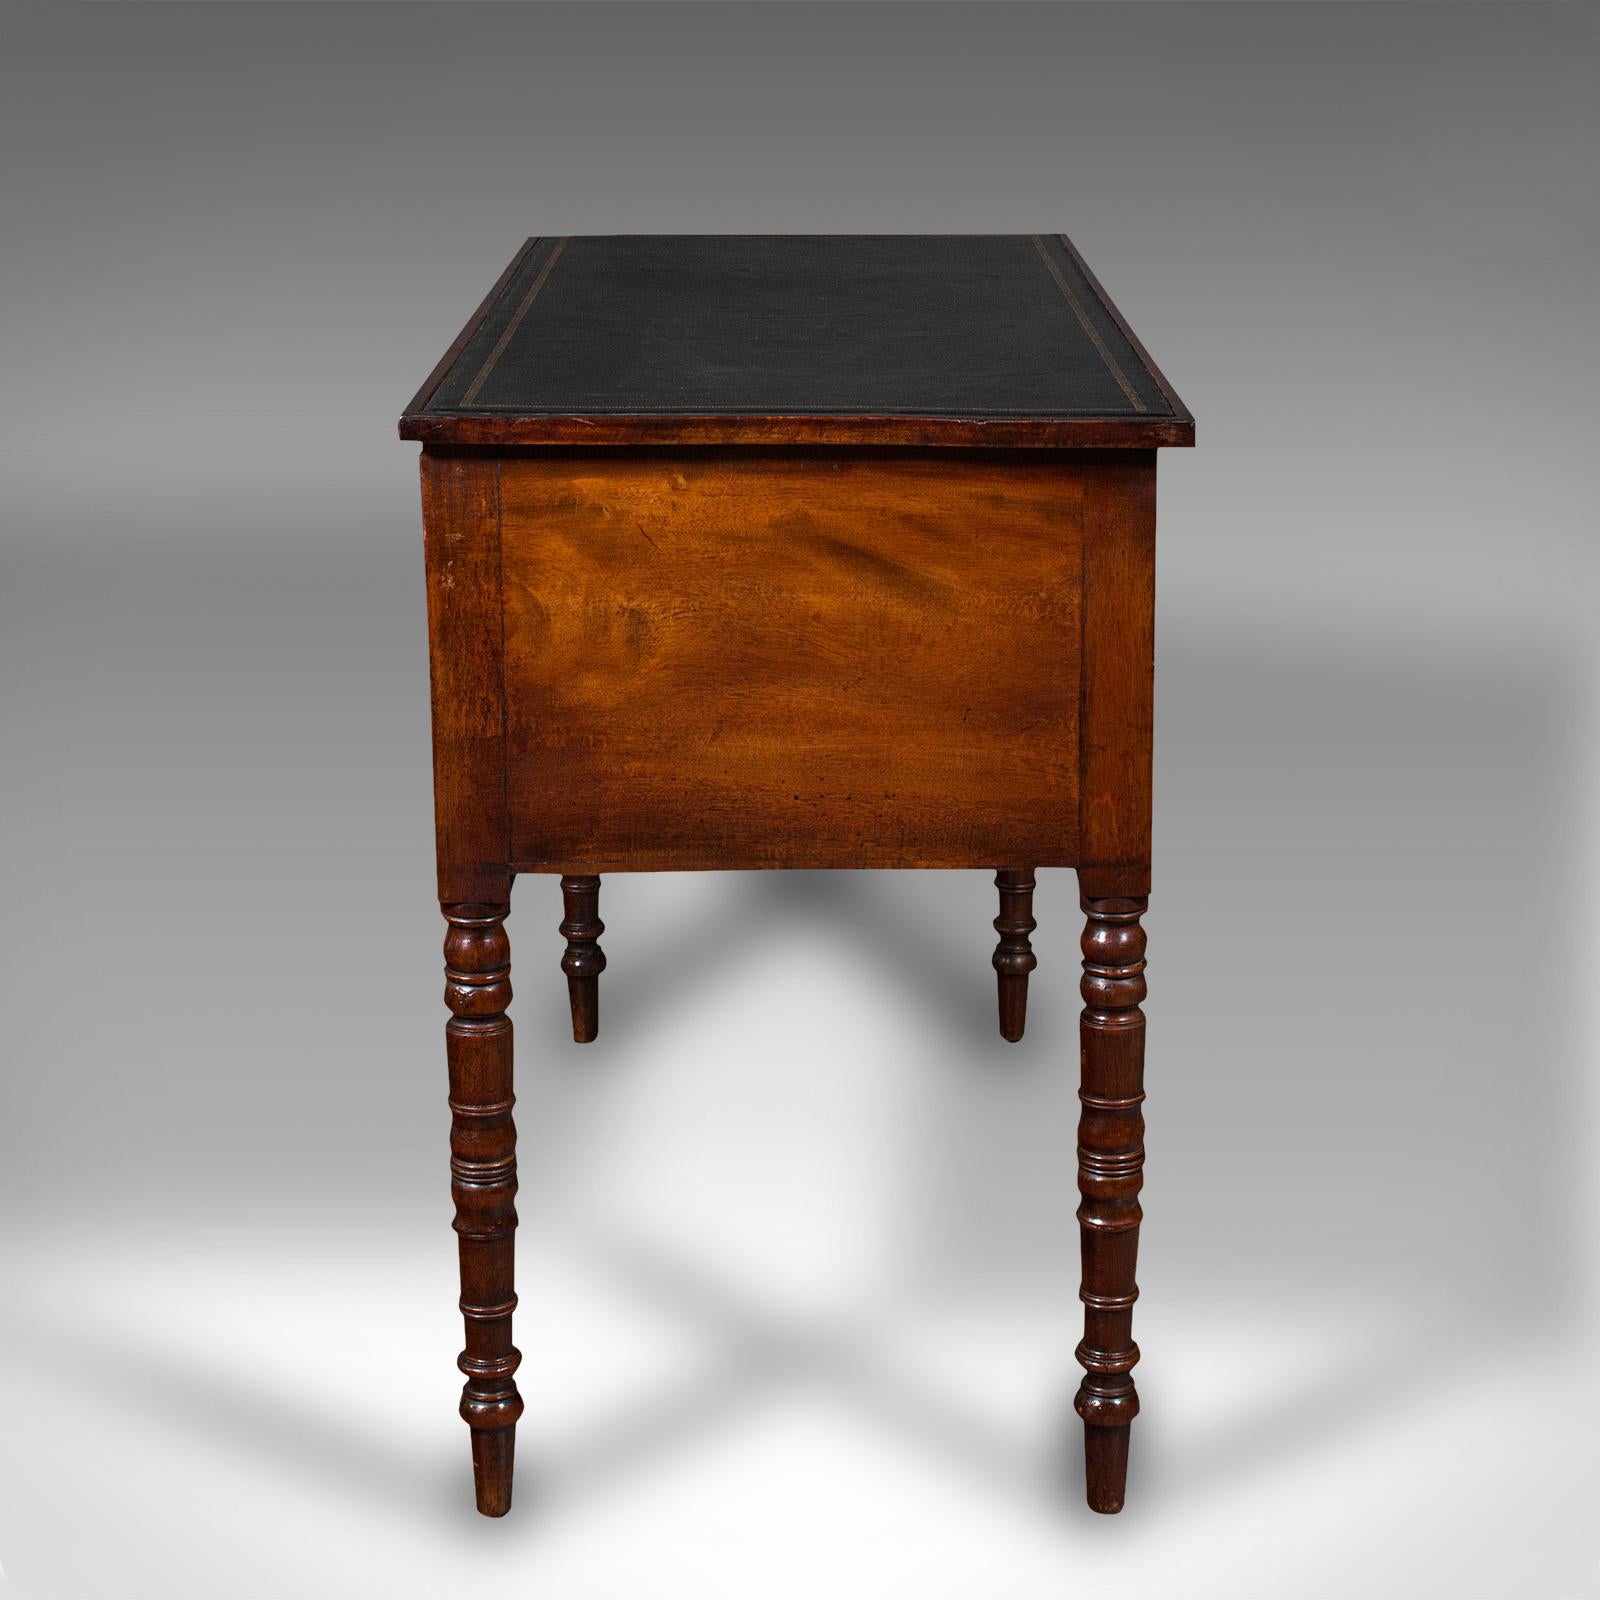 Antique Ladies Writing Desk, English, Correspondence Table, Victorian, C.1850 In Good Condition For Sale In Hele, Devon, GB